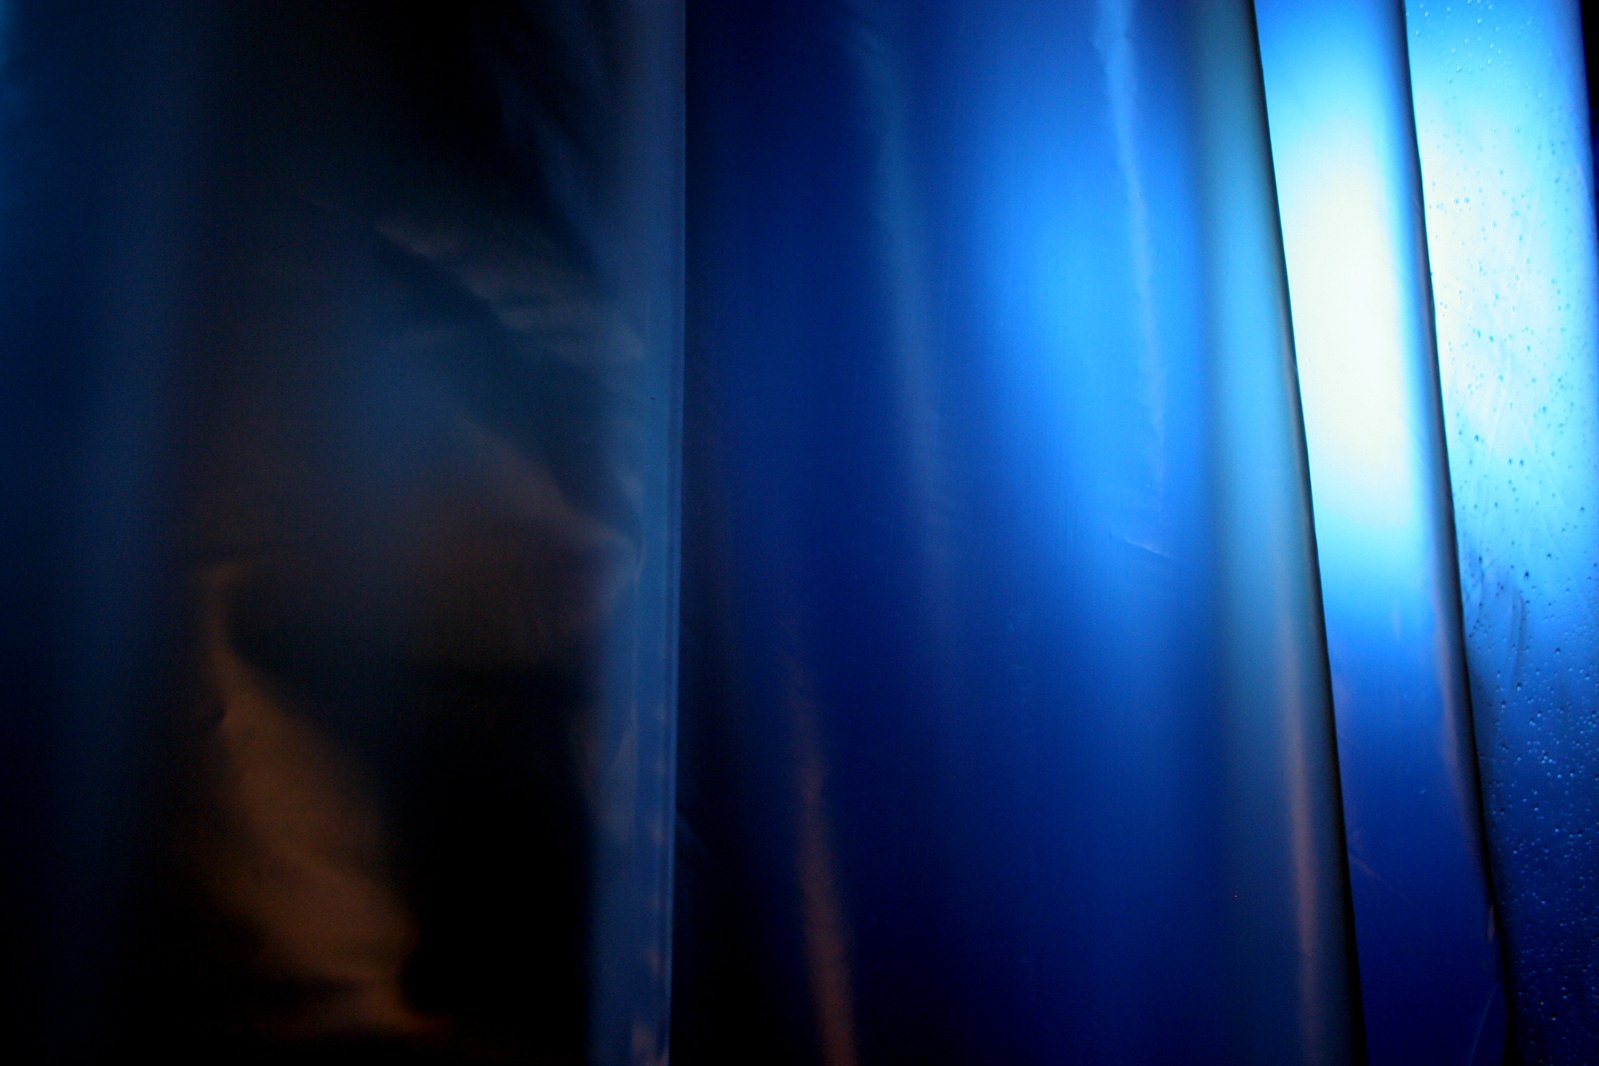 some blue curtained curtains lit up in the dark